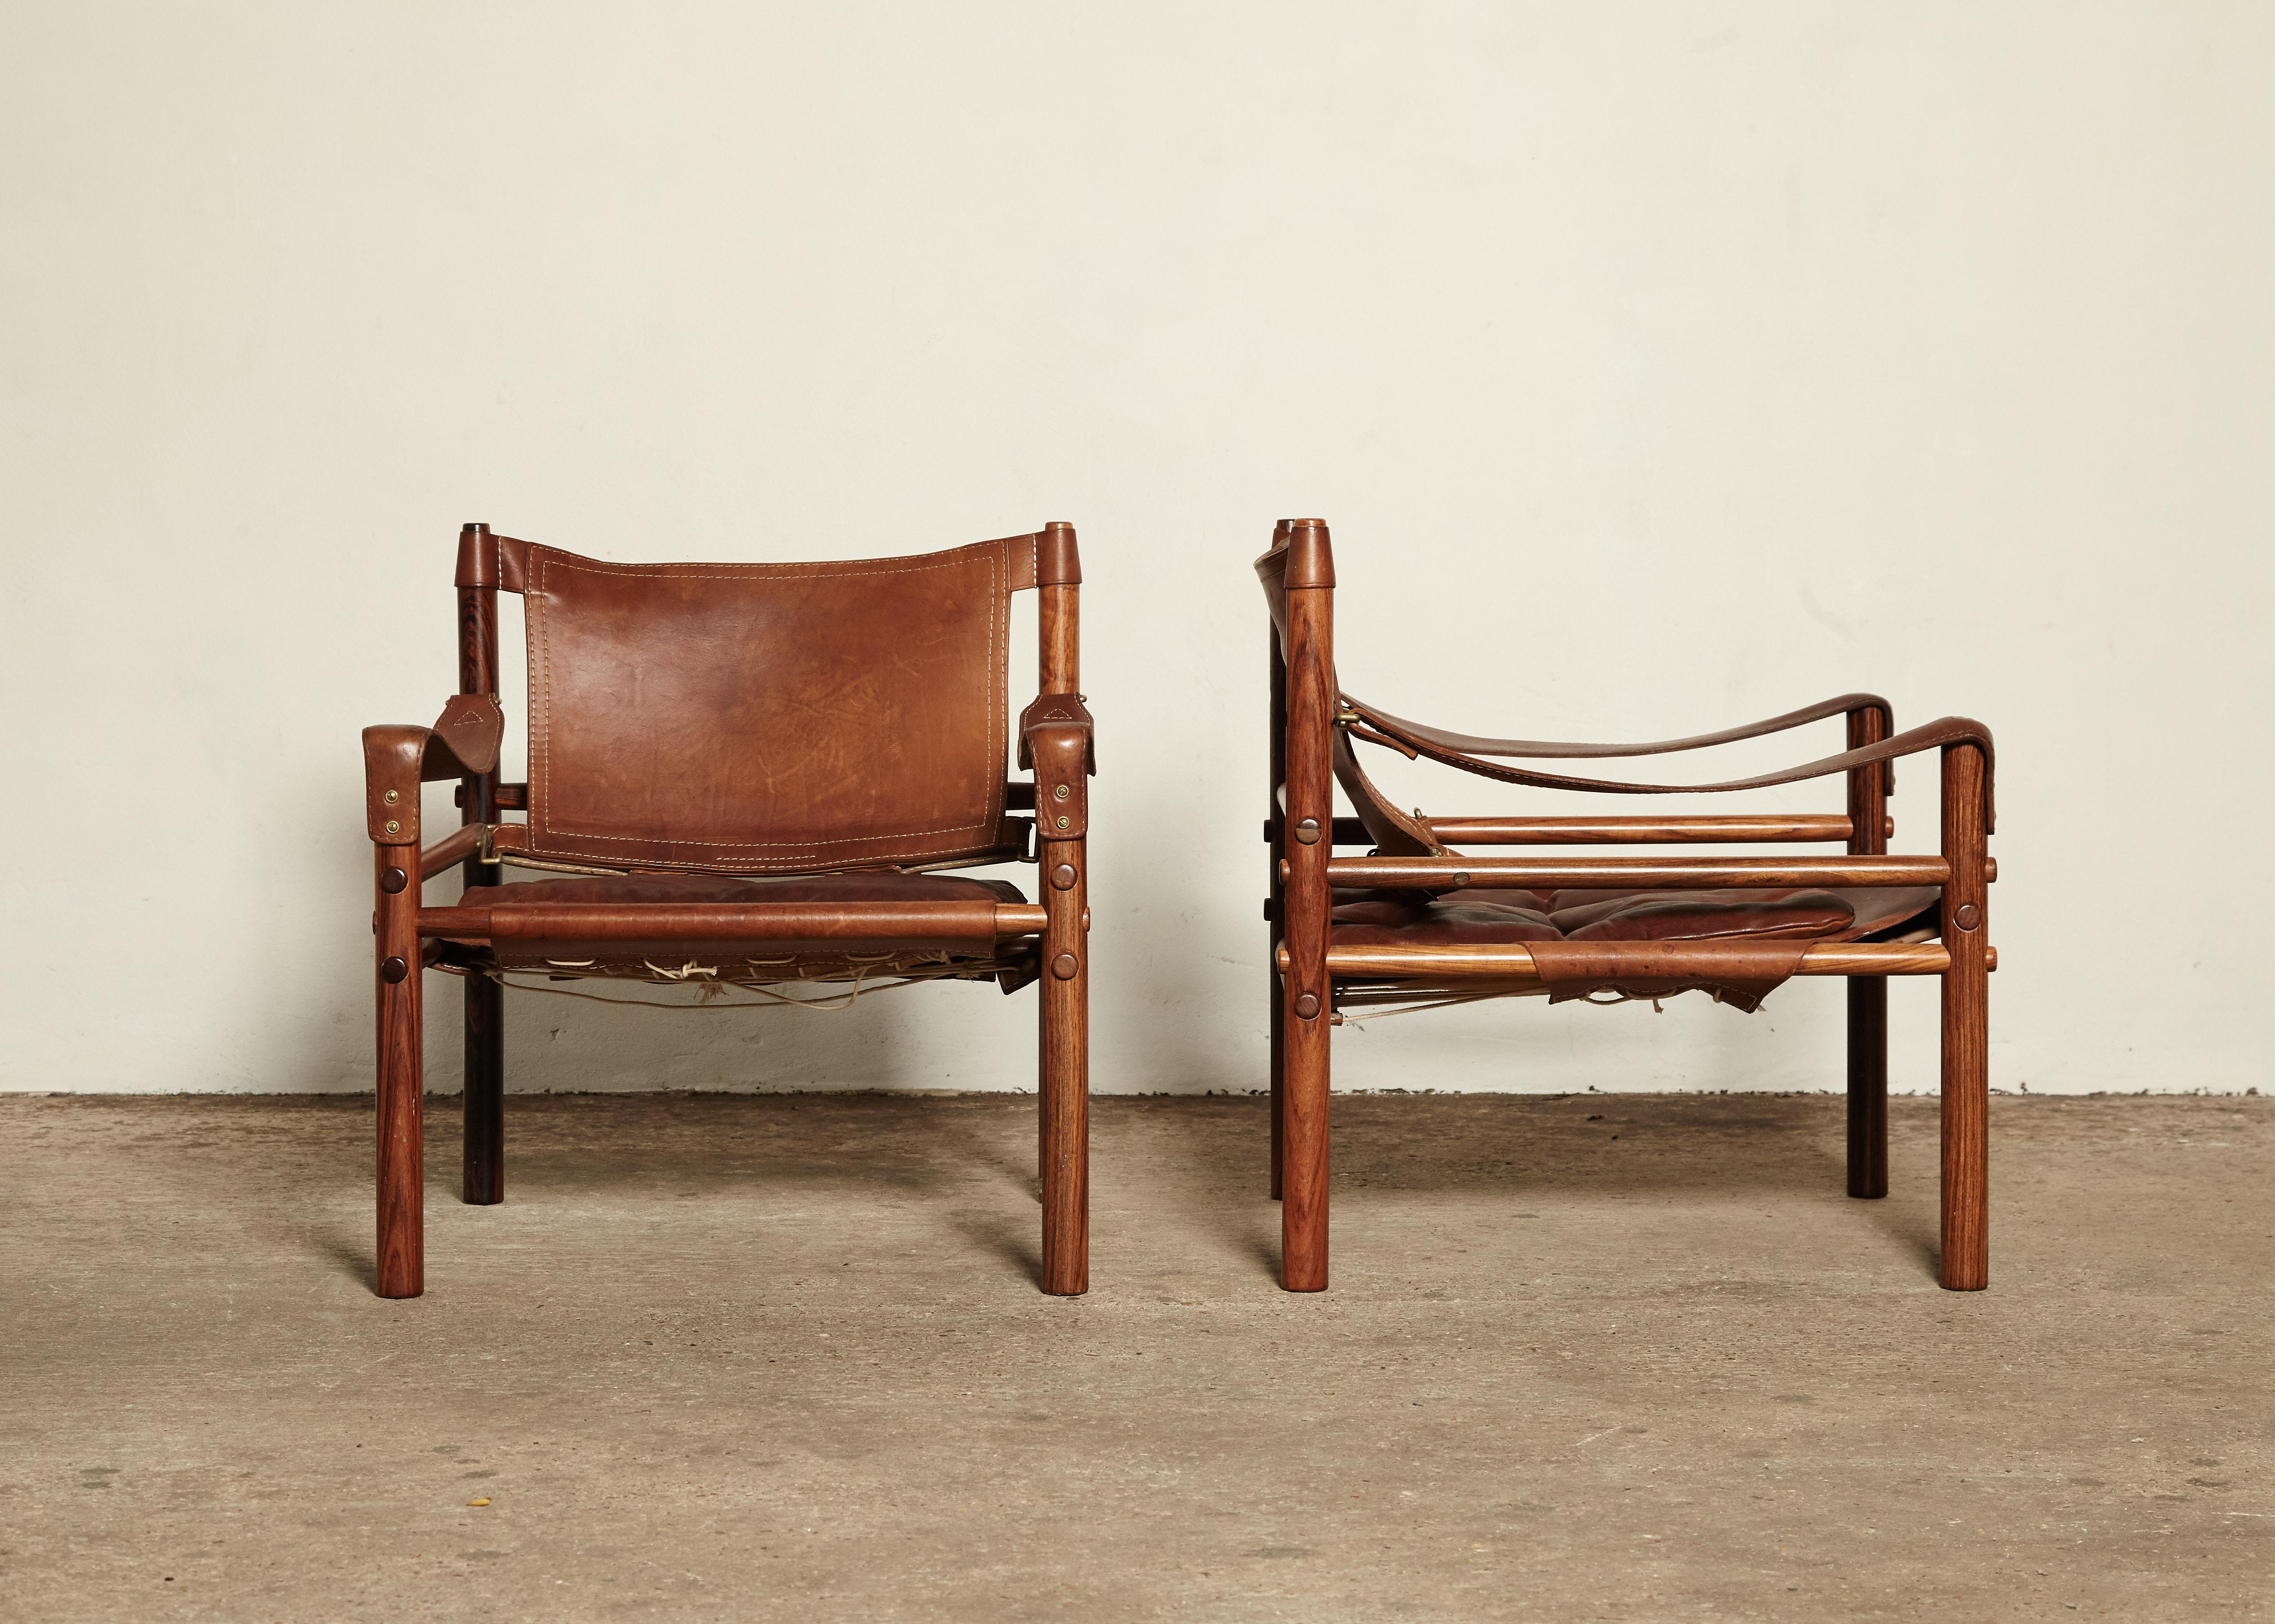 A stunning pair of authentic vintage Arne Norell safari sirocco chairs in rosewood and beautifully patinated brown leather. Made by Norell Mobler in Sweden. Wonderful original condition and rarely found with such special wood grain and patinated